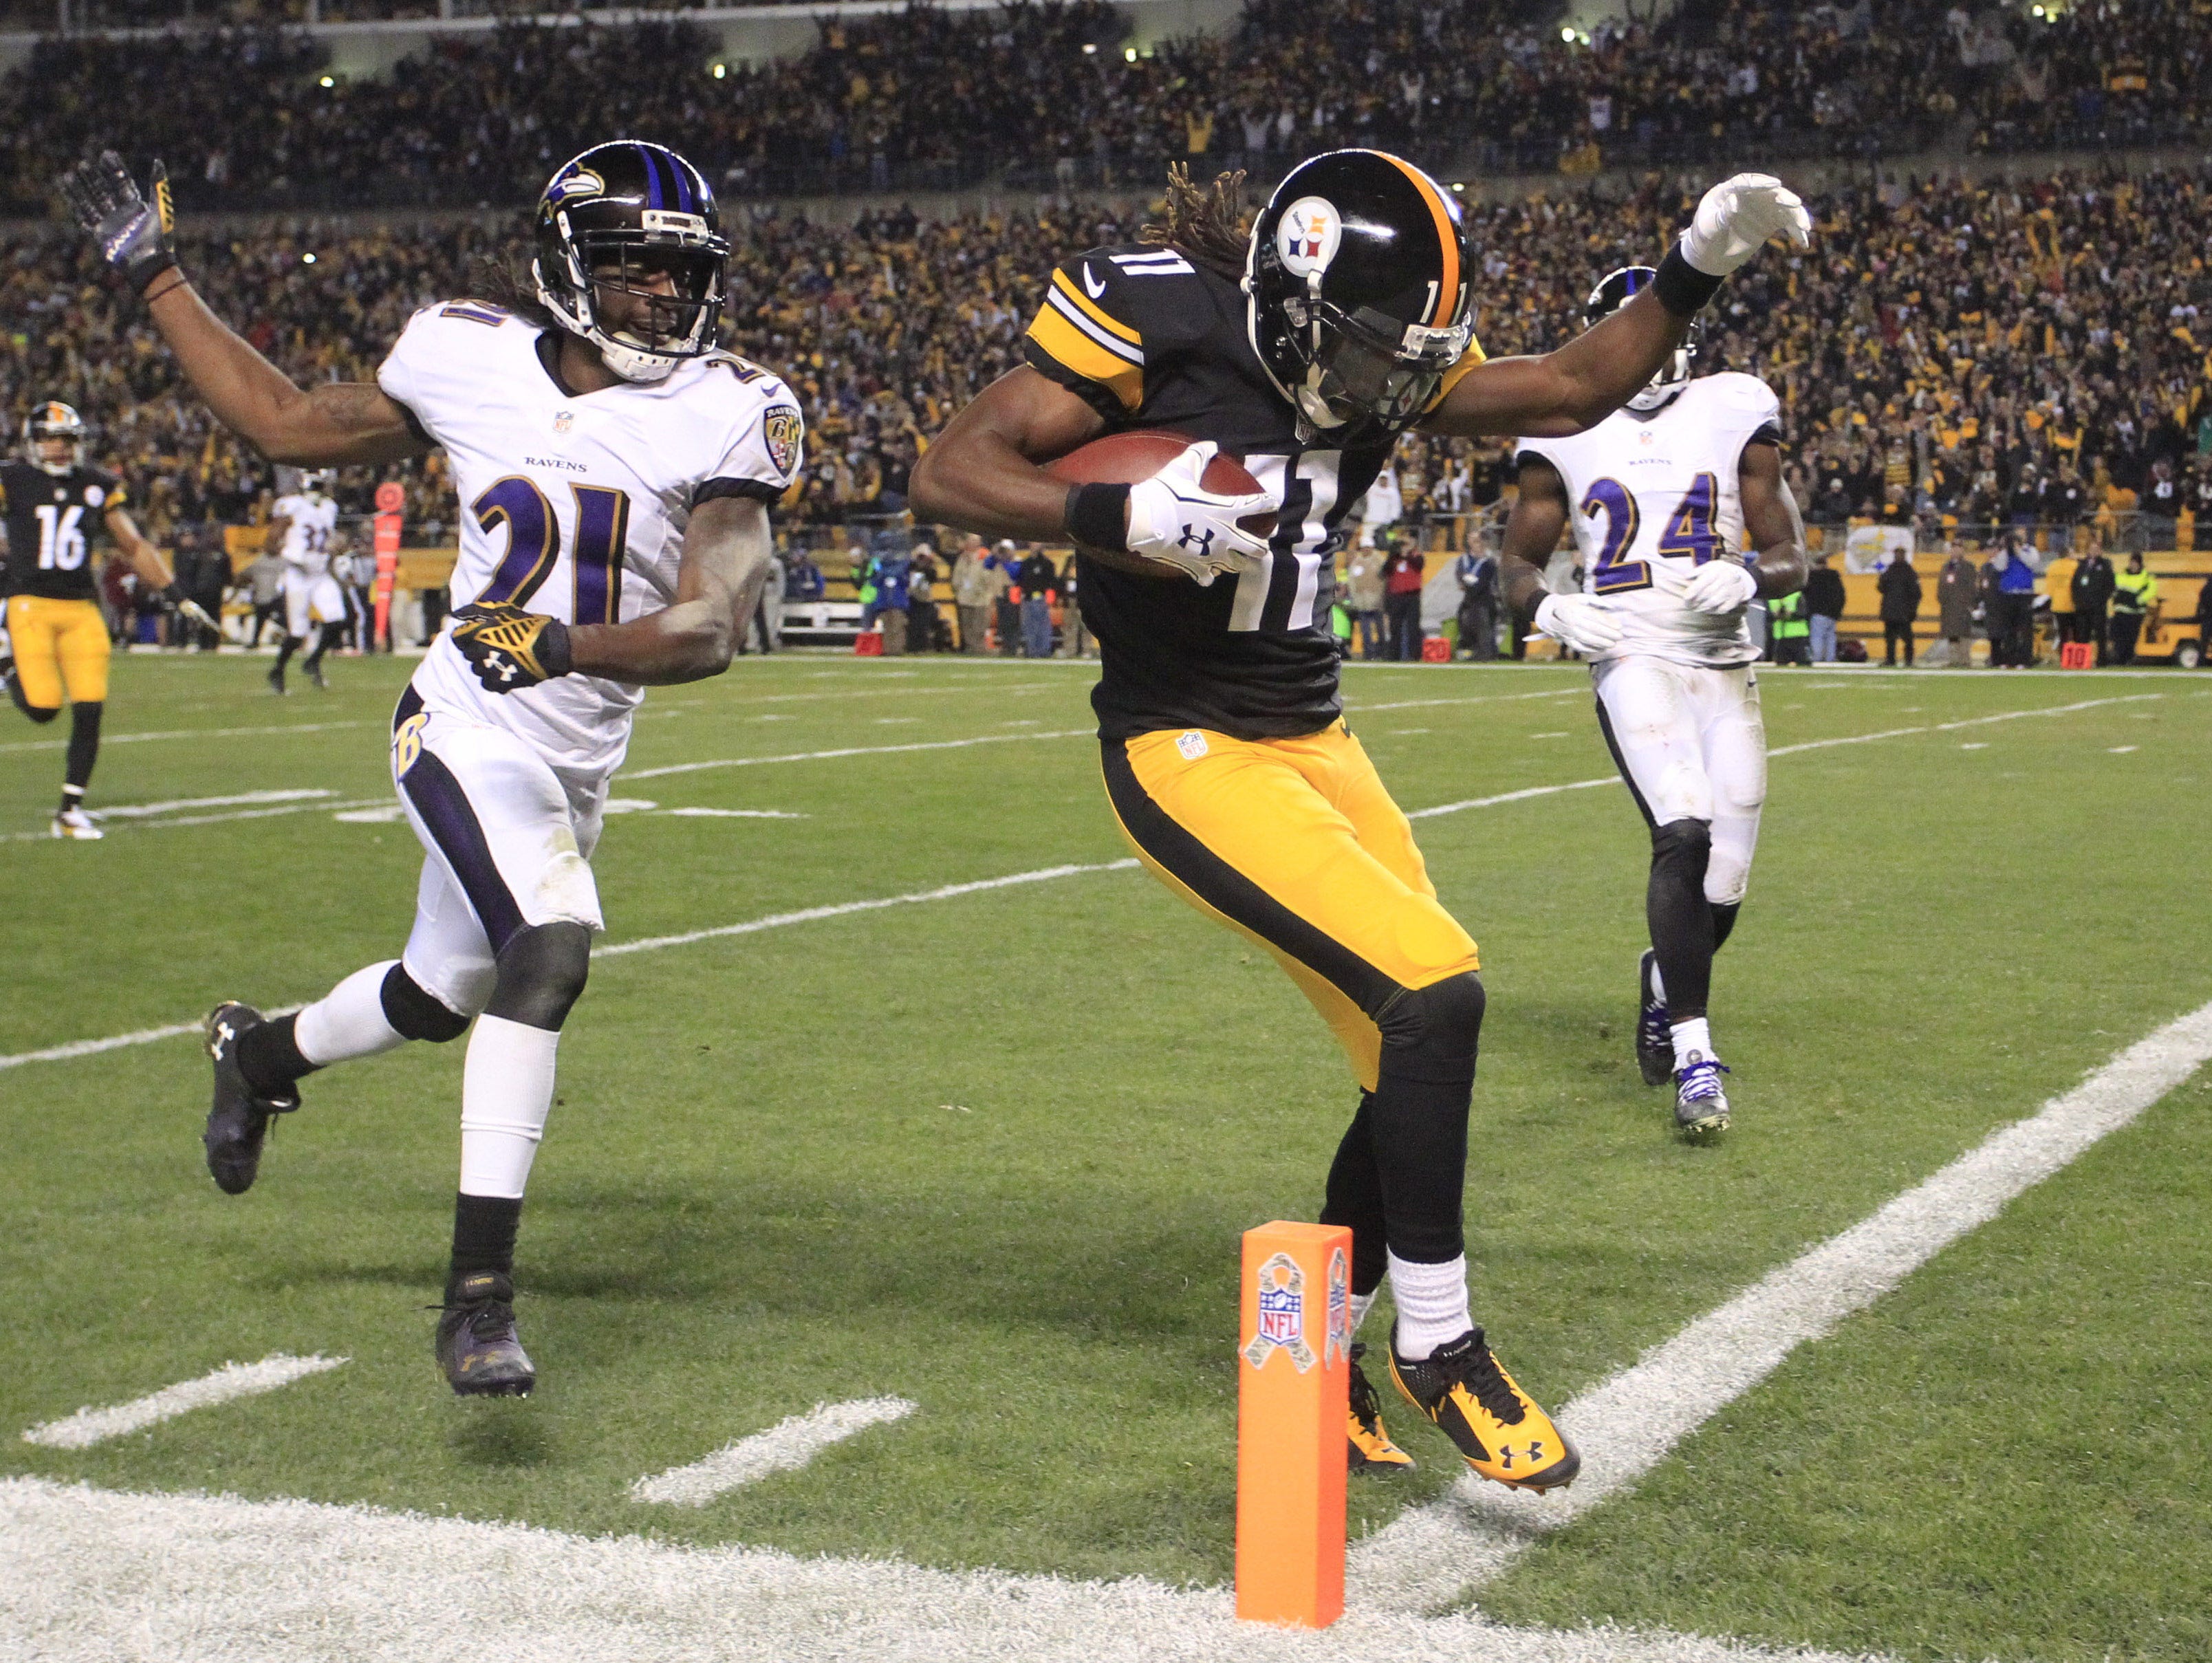 Pittsburgh Steelers wide receiver Markus Wheaton (11) scores on a 47-yard touchdown pass against Baltimore Ravens cornerback Lardarius Webb (21) during the second quarter at Heinz Field.